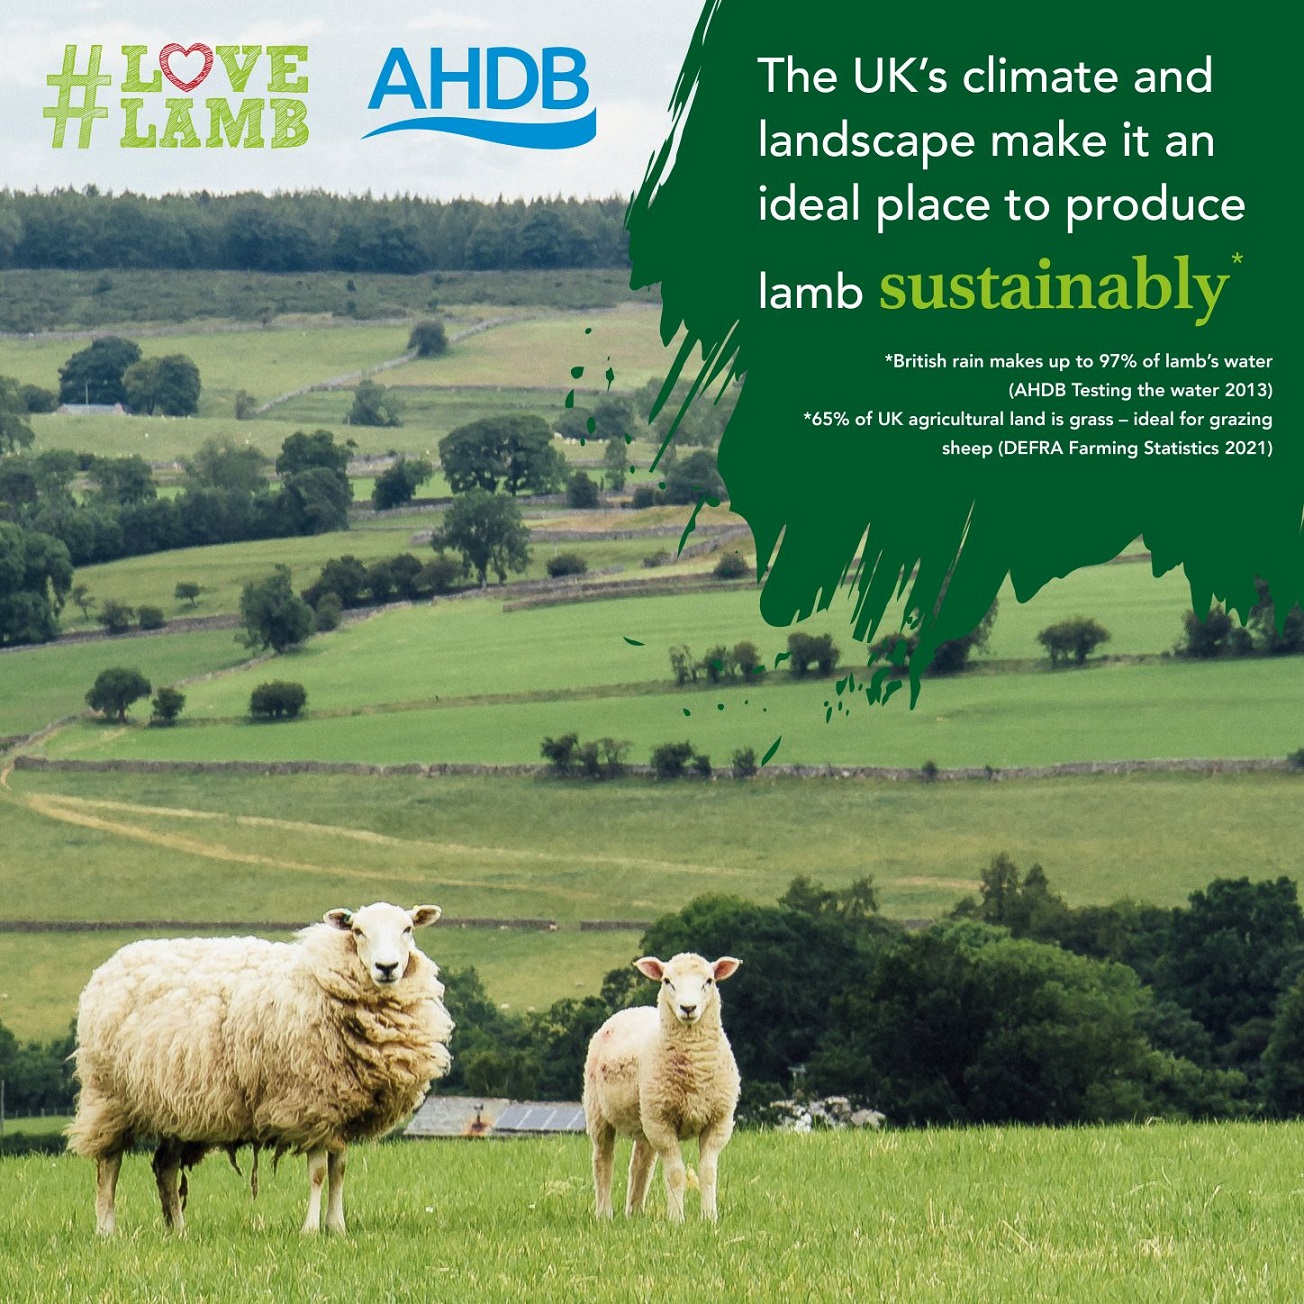 The UK's climate and landscape make it an ideal place to produce lamb sustainably